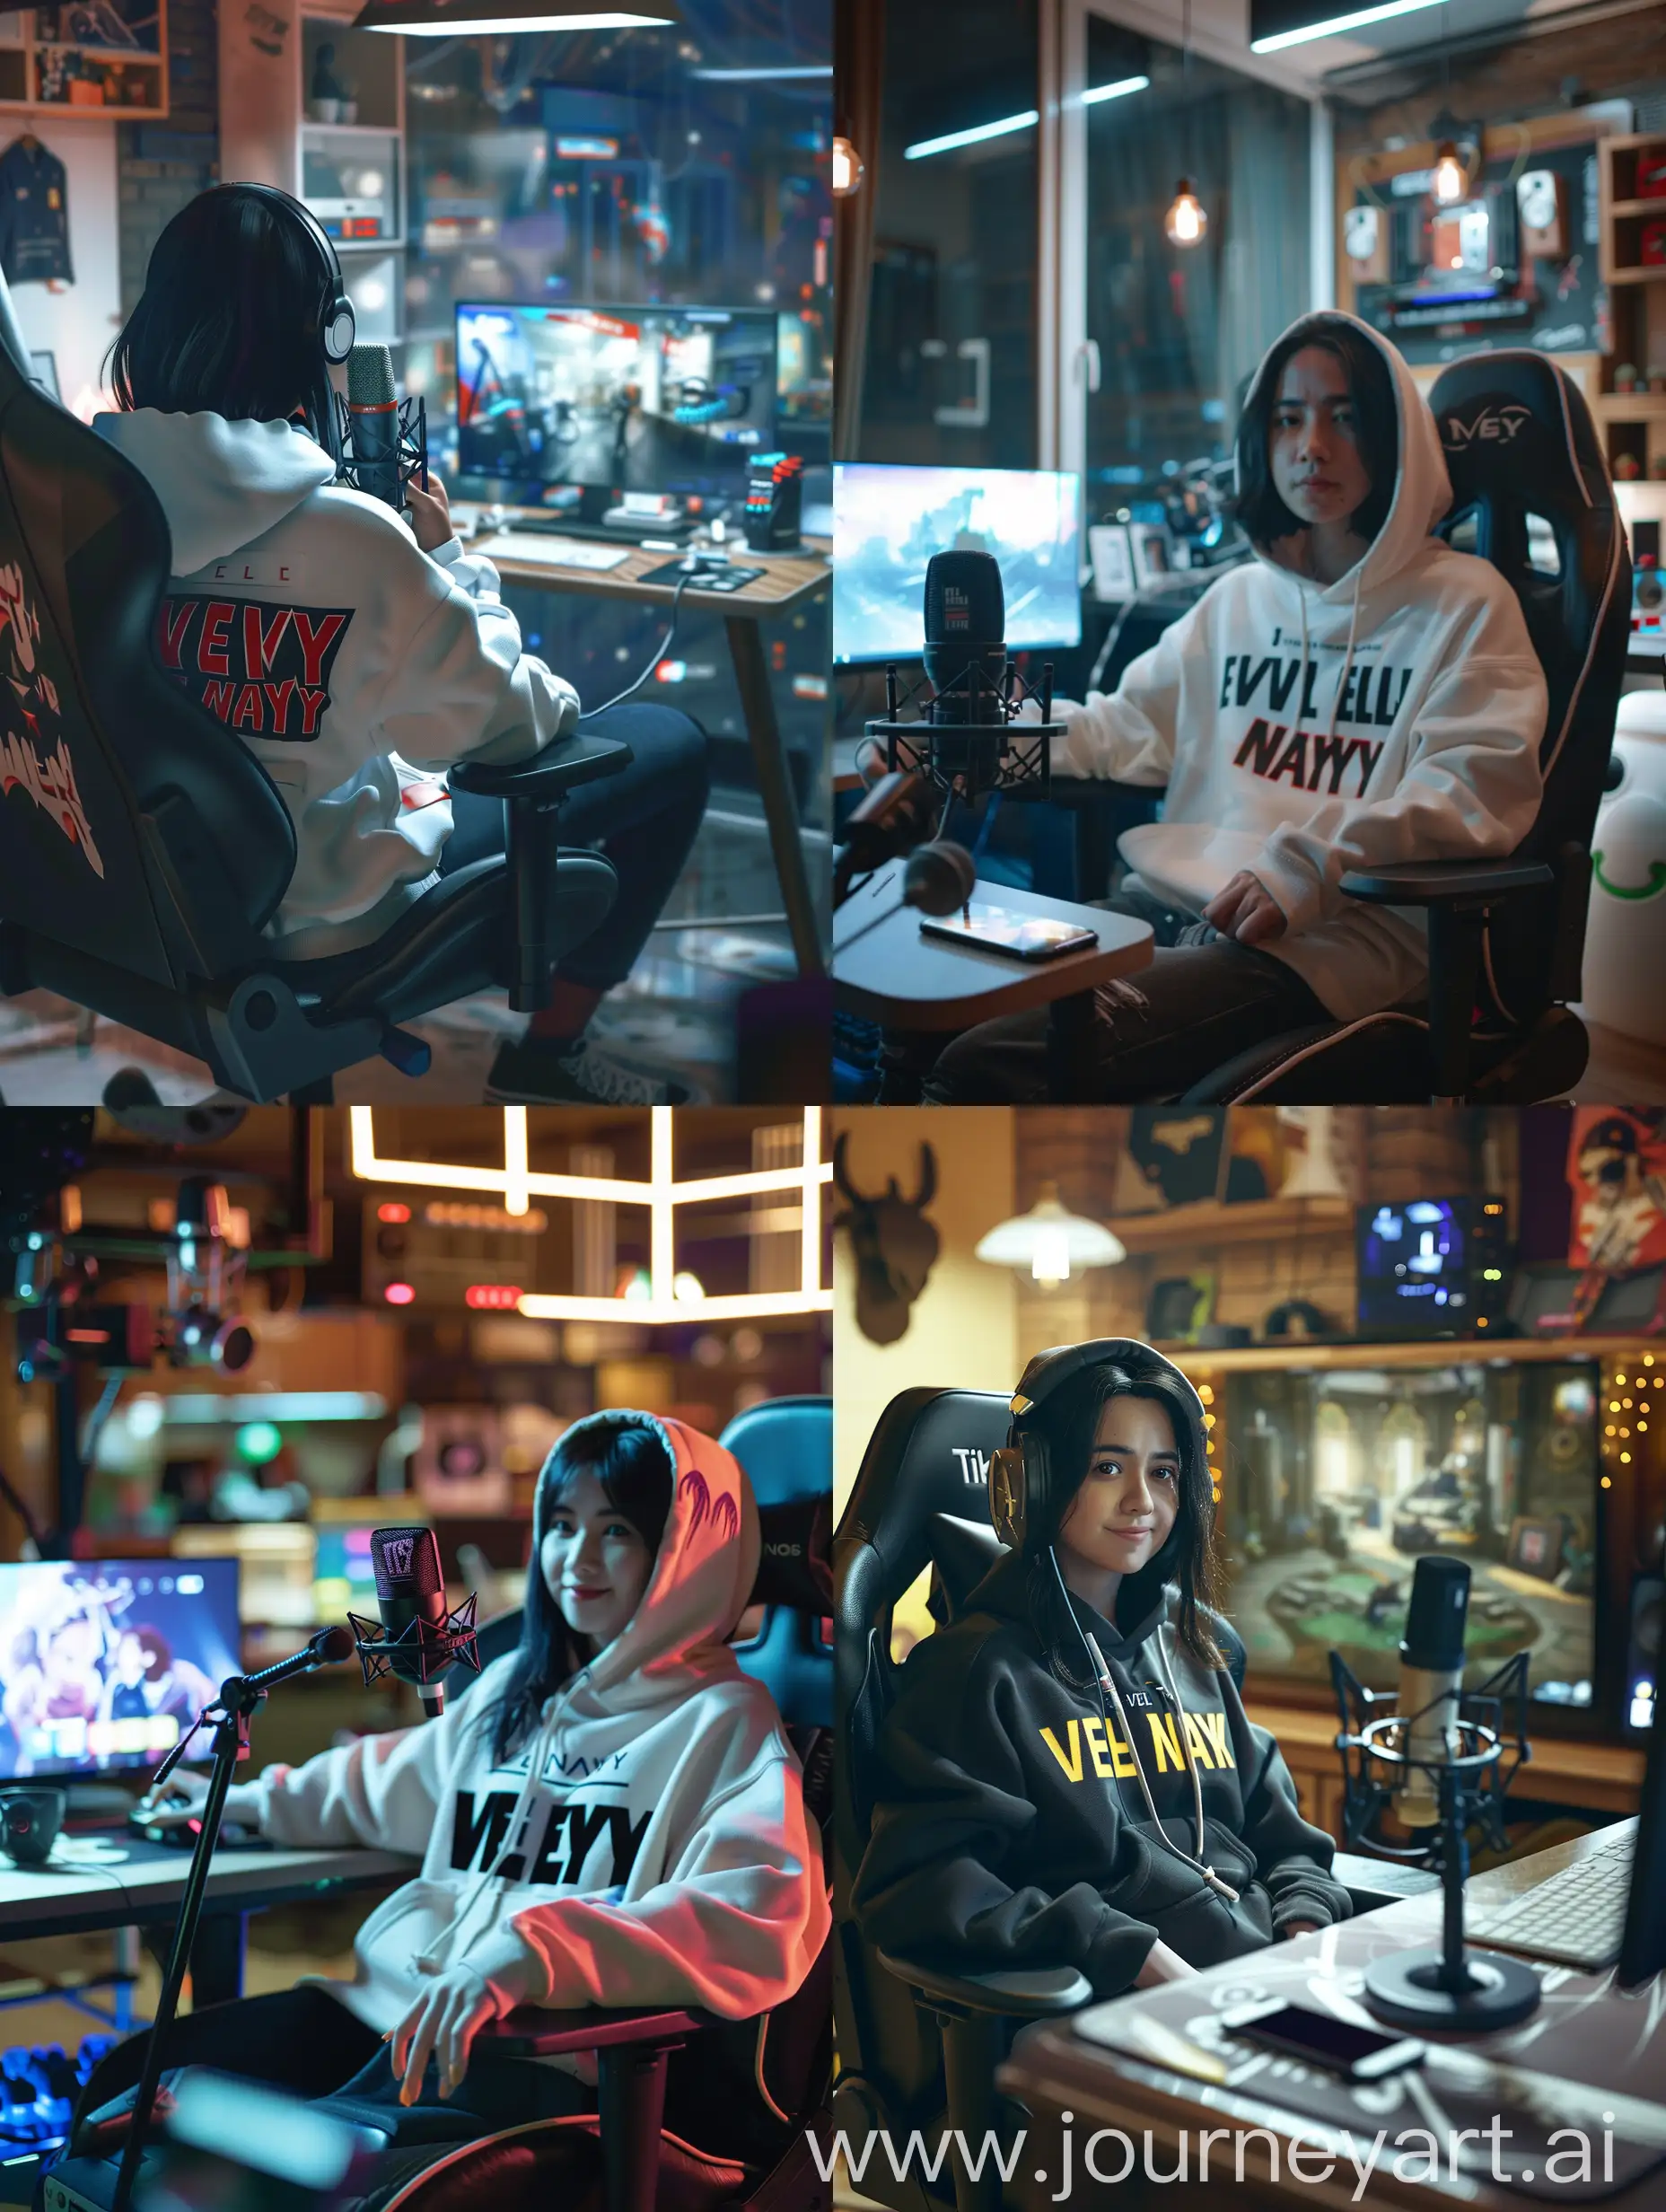 A 32-year-old Indonesian woman is making a podcast on the Tik Tok application, sitting in a gaming chair wearing a 'VEL NAYS' hoodie. In front of him is a microphone and an Apple phone on a table, with a realistic HD background of a room with the words 'VEL NAYS' written on it.